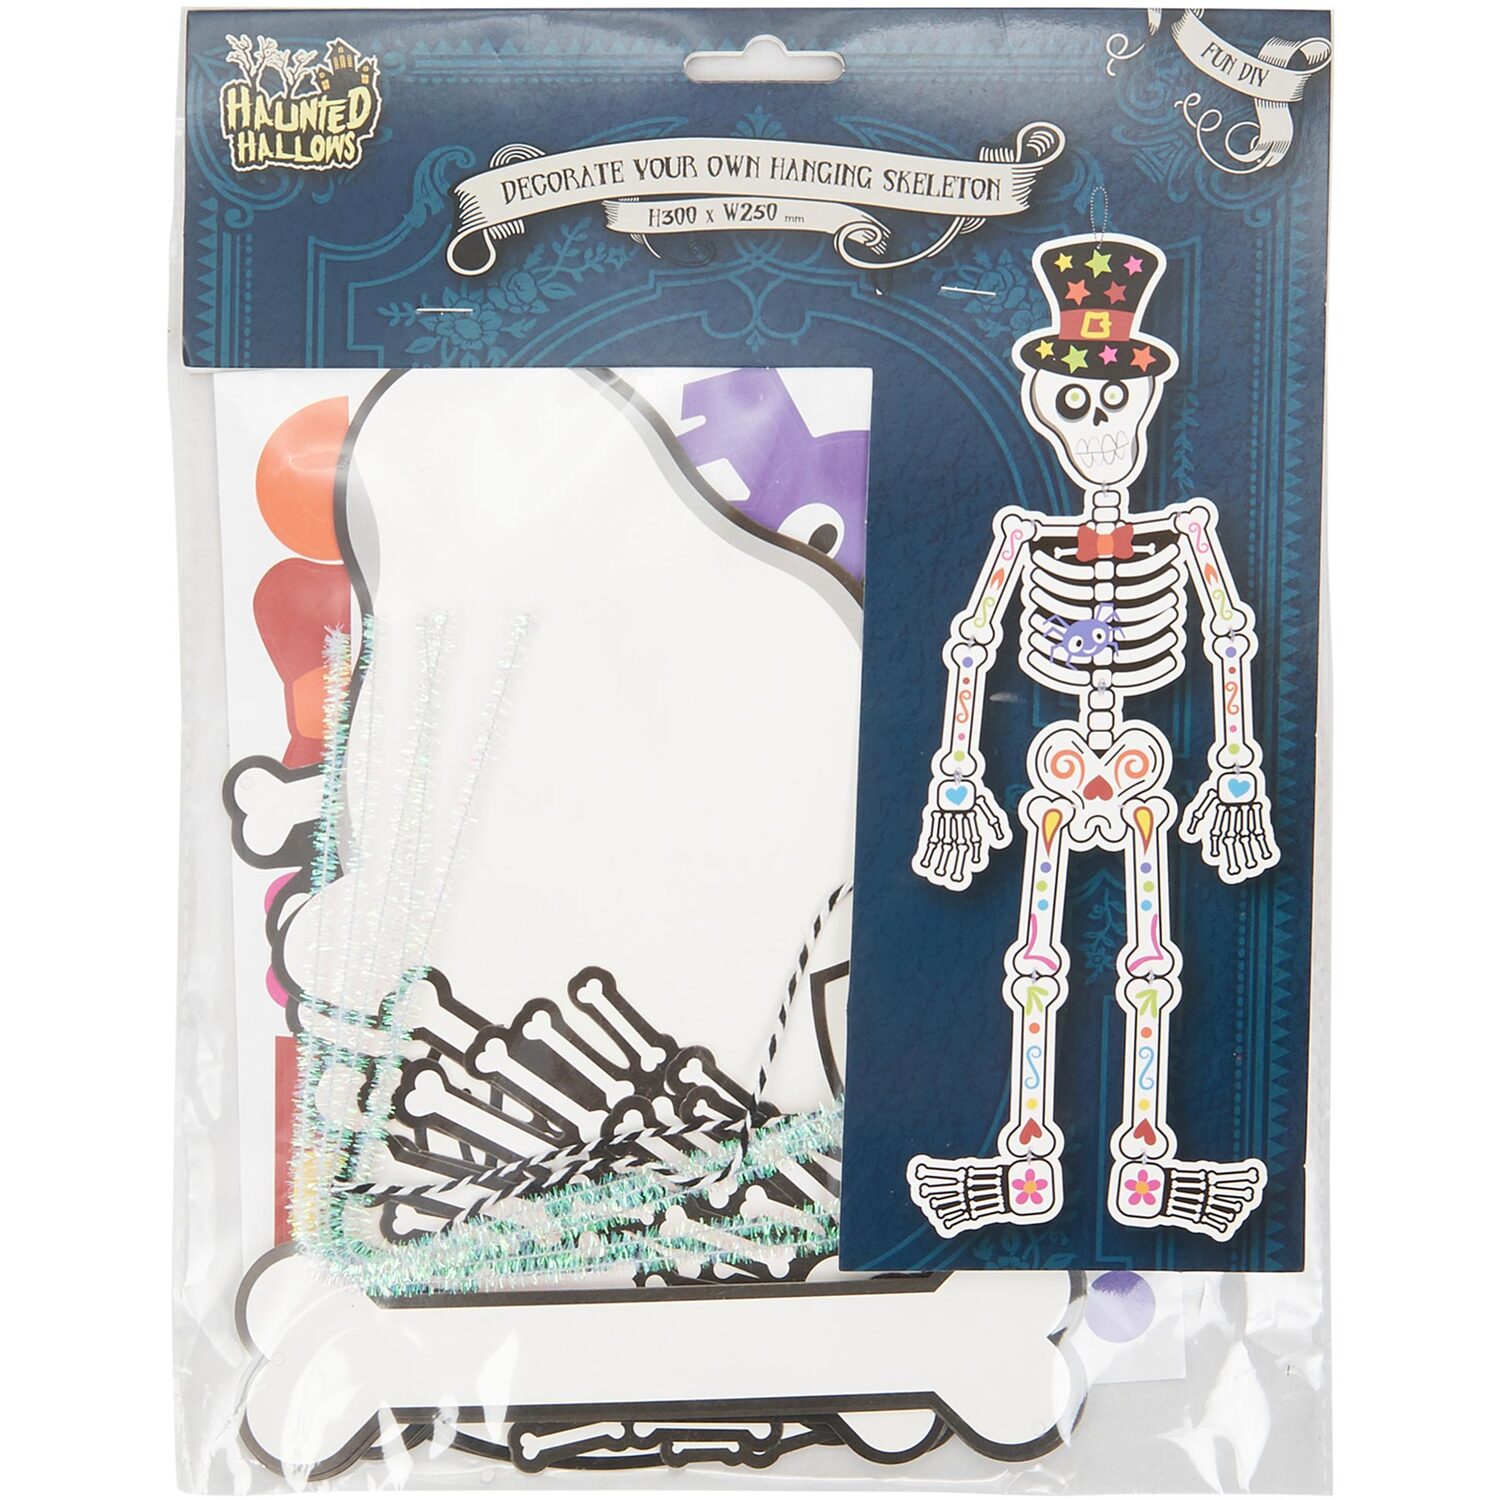 Haunted Hallows Decorate Your Own Hanging Skeleton Decoration Image 1